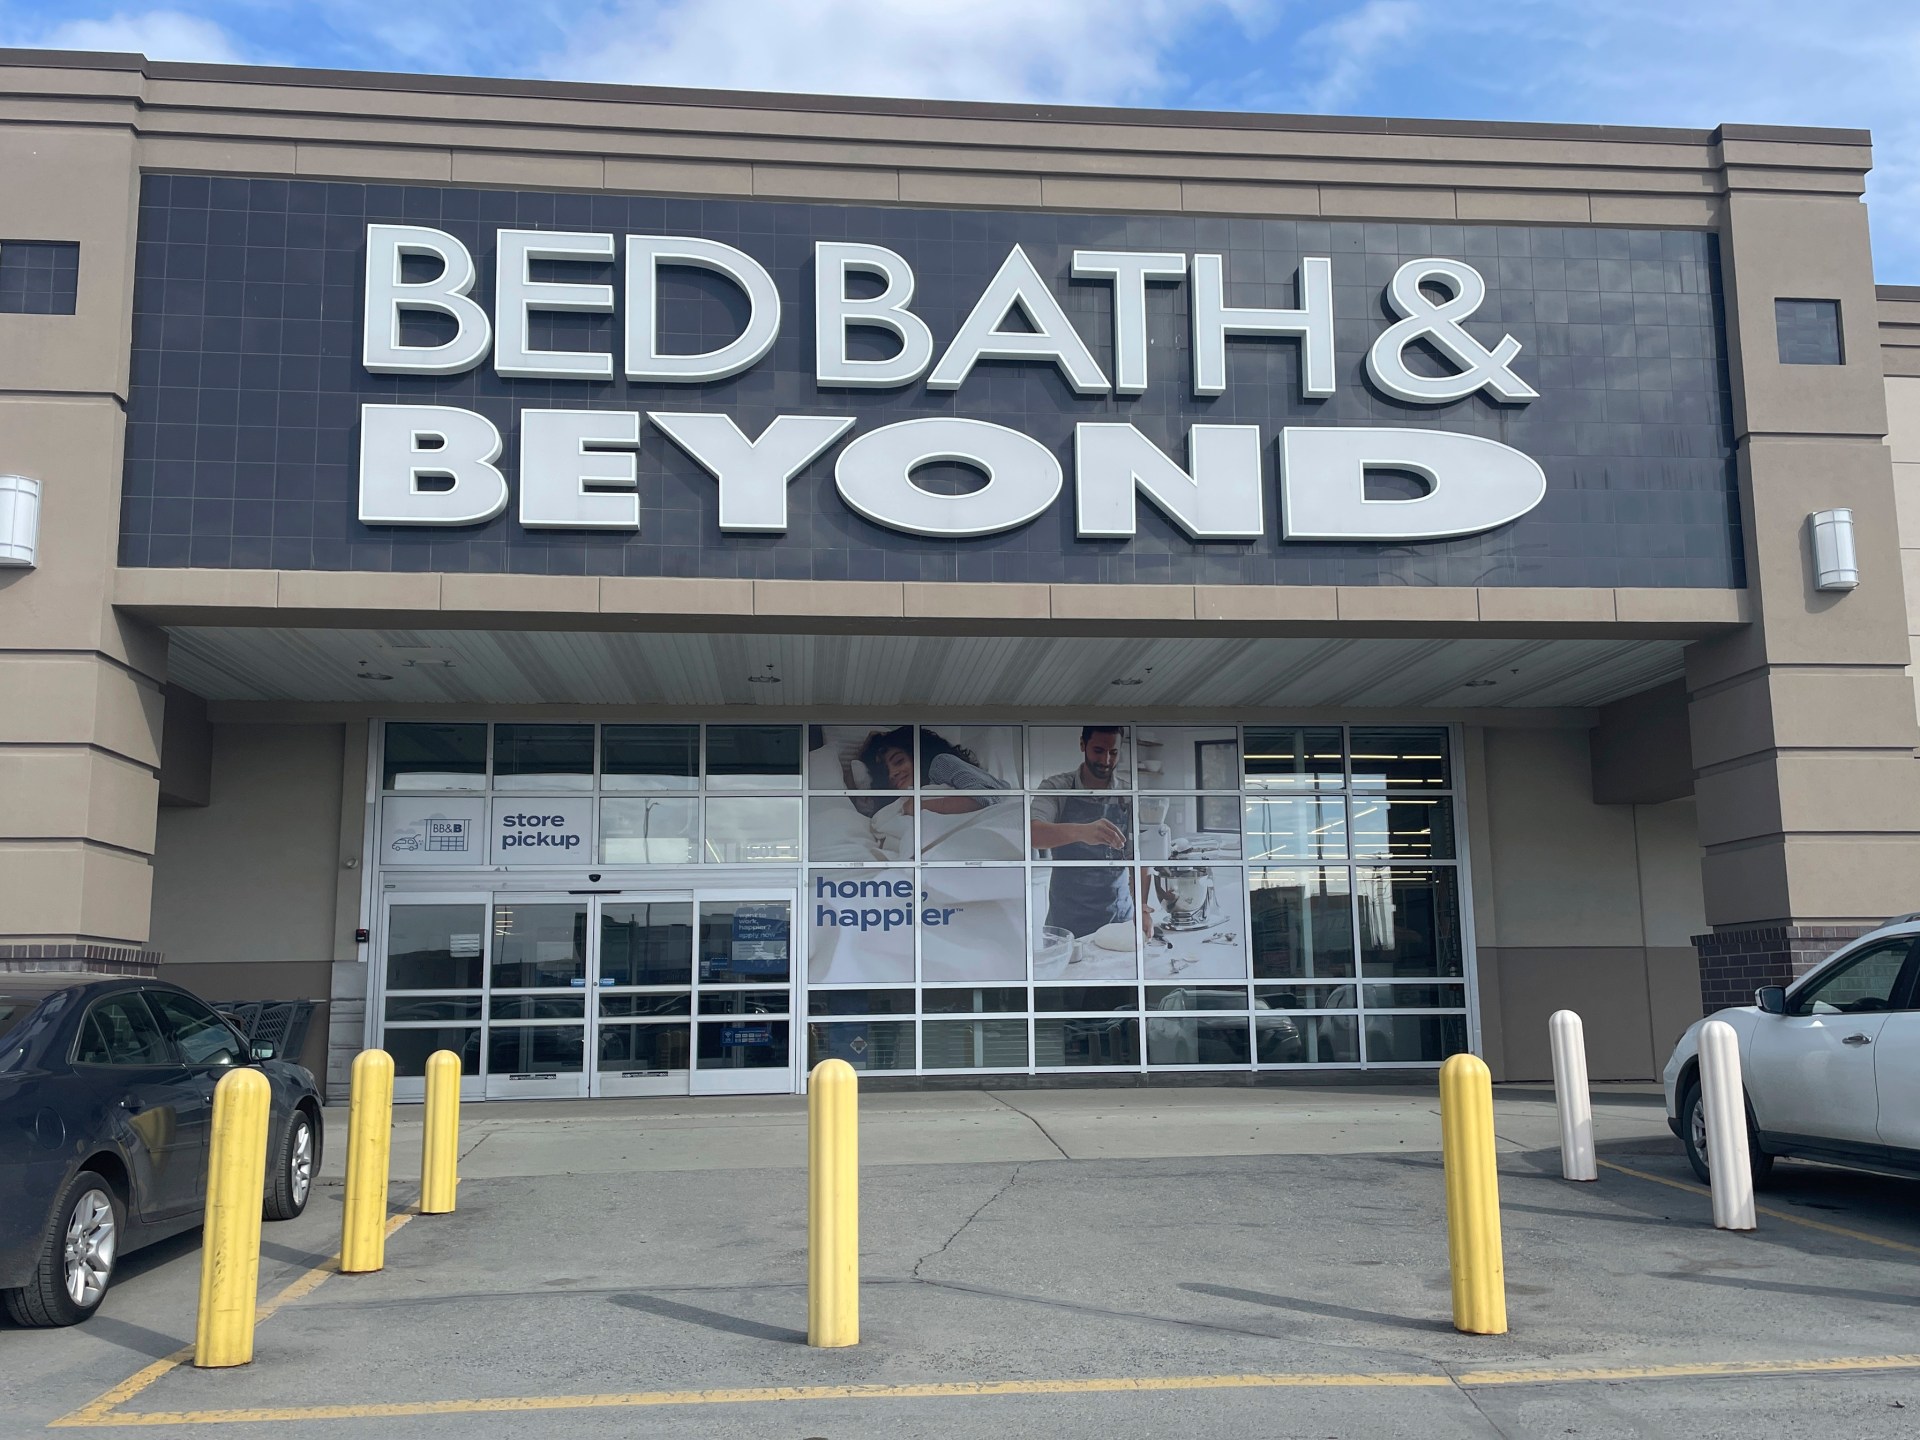 Bed Bath & Beyond files for US bankruptcy protection | Business and Economy News